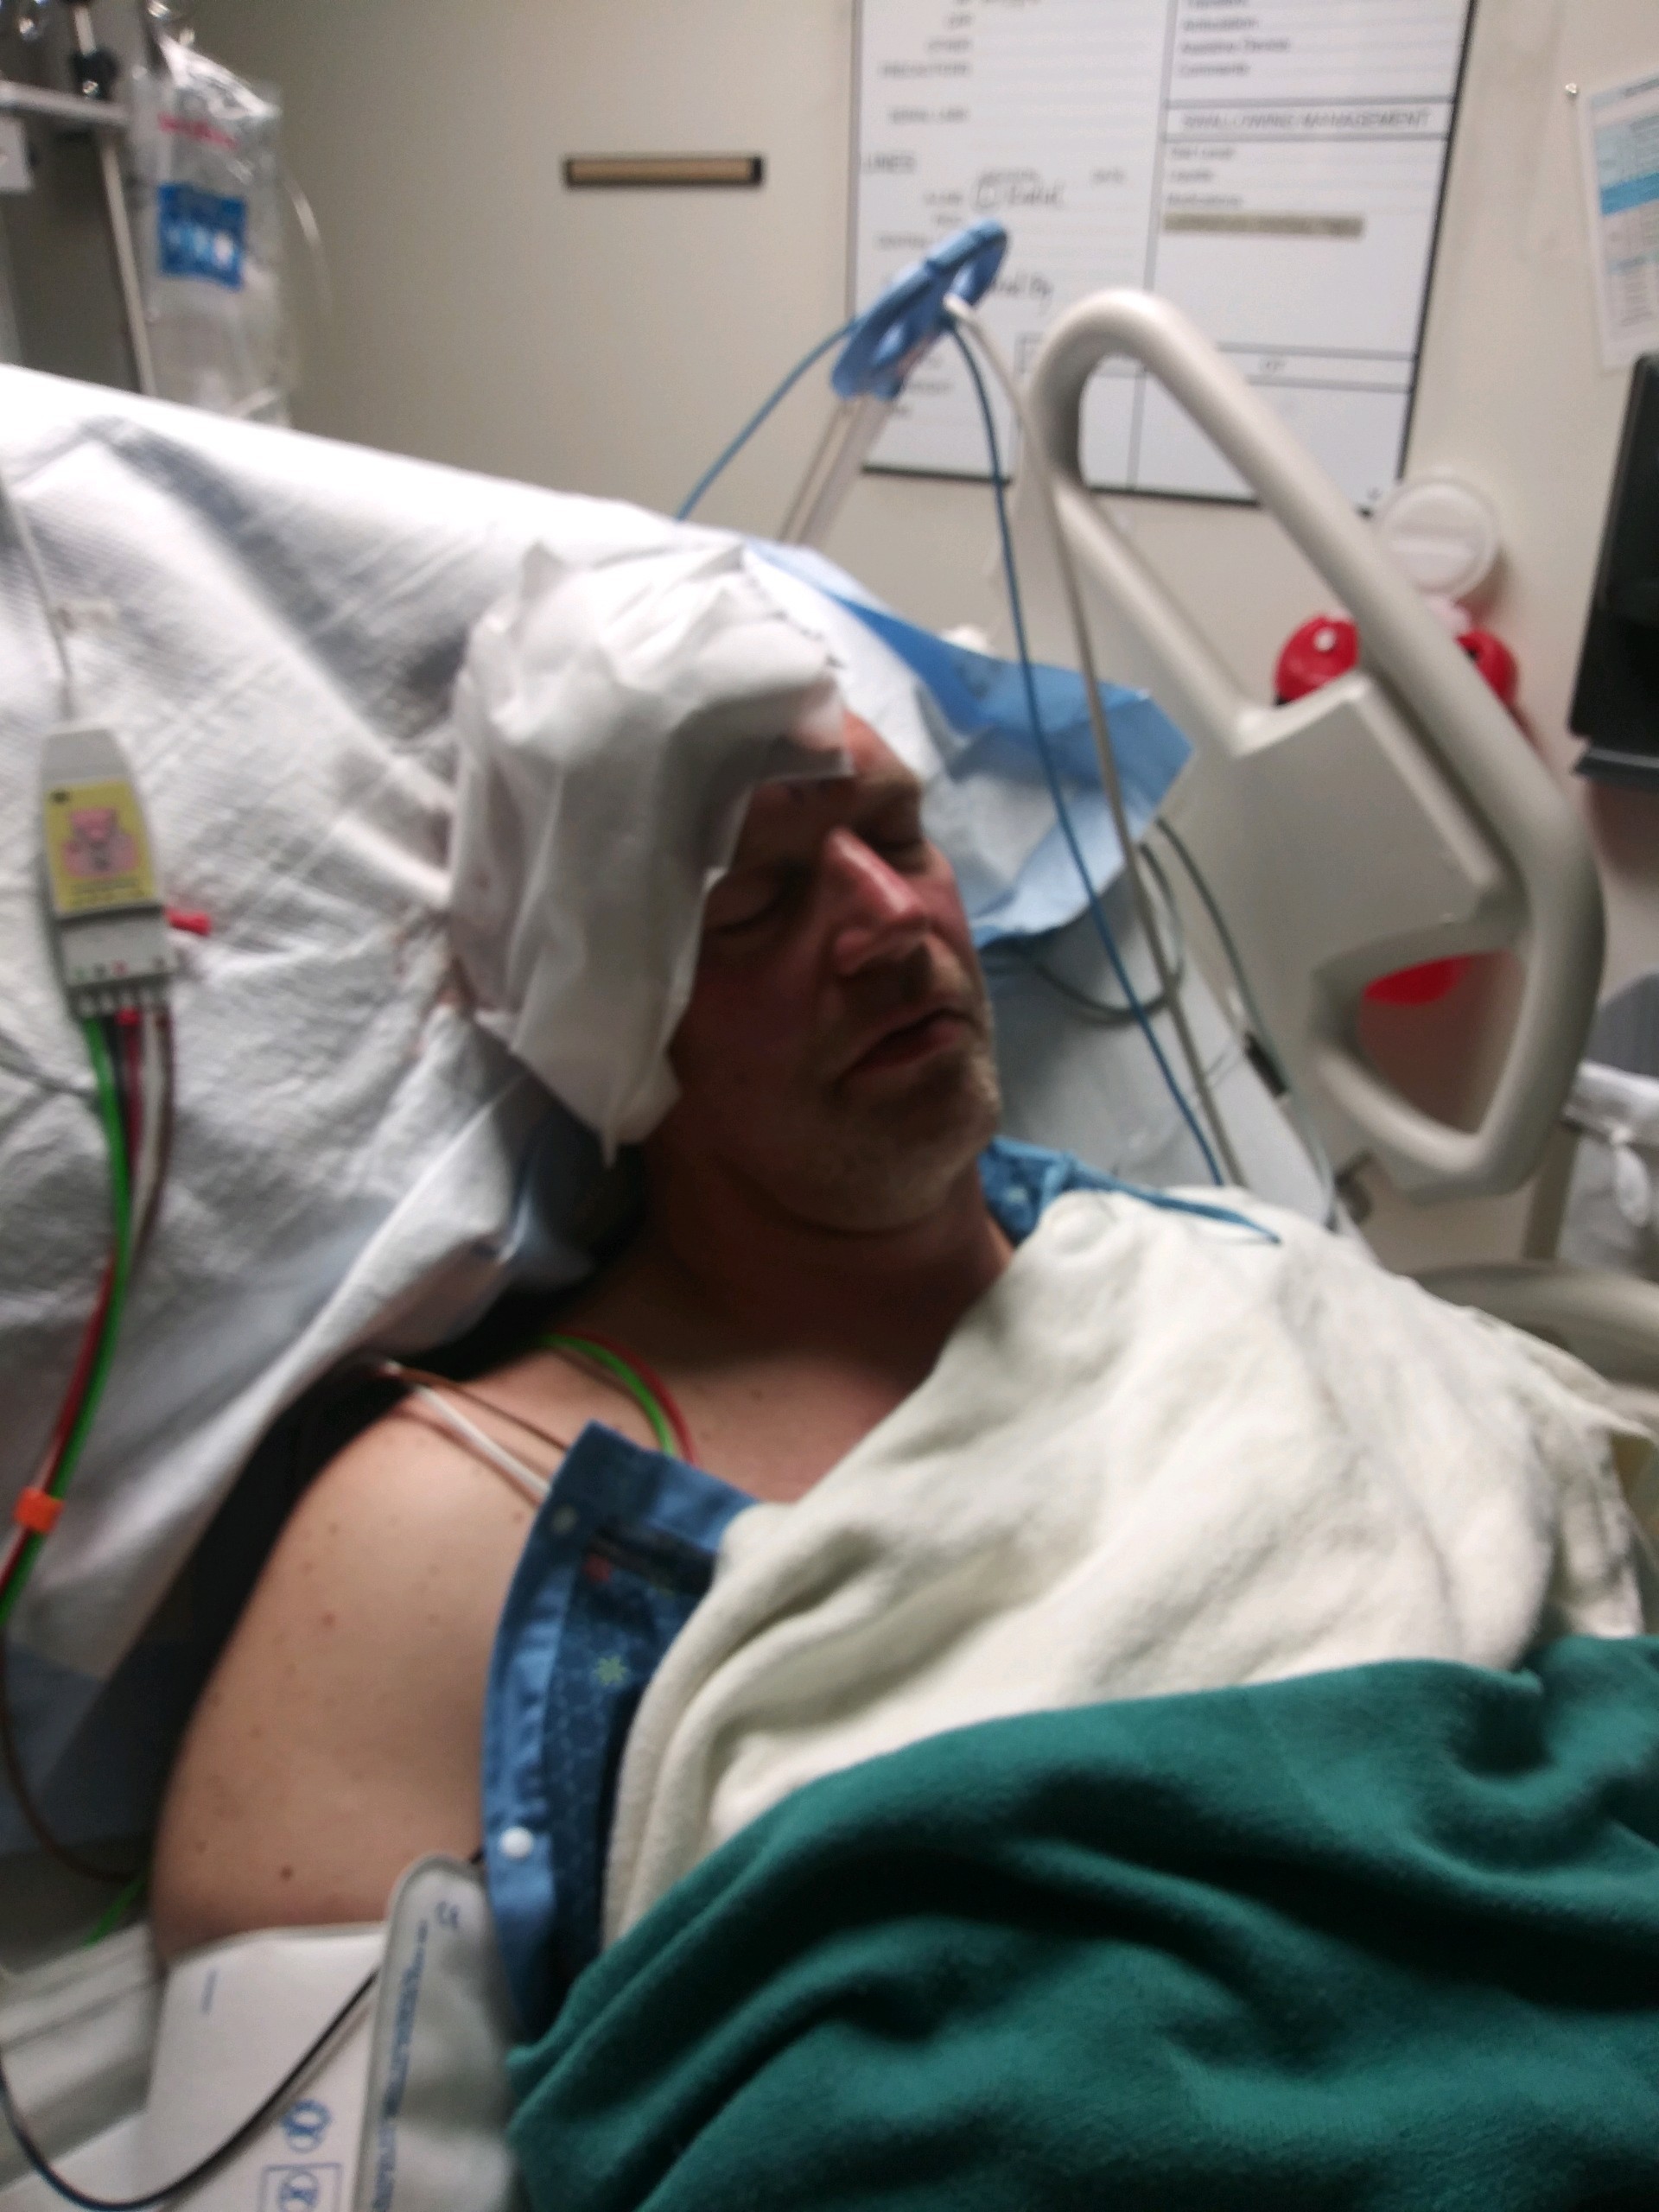 Dave Perry in hospital bed with gauze on his head after surgery